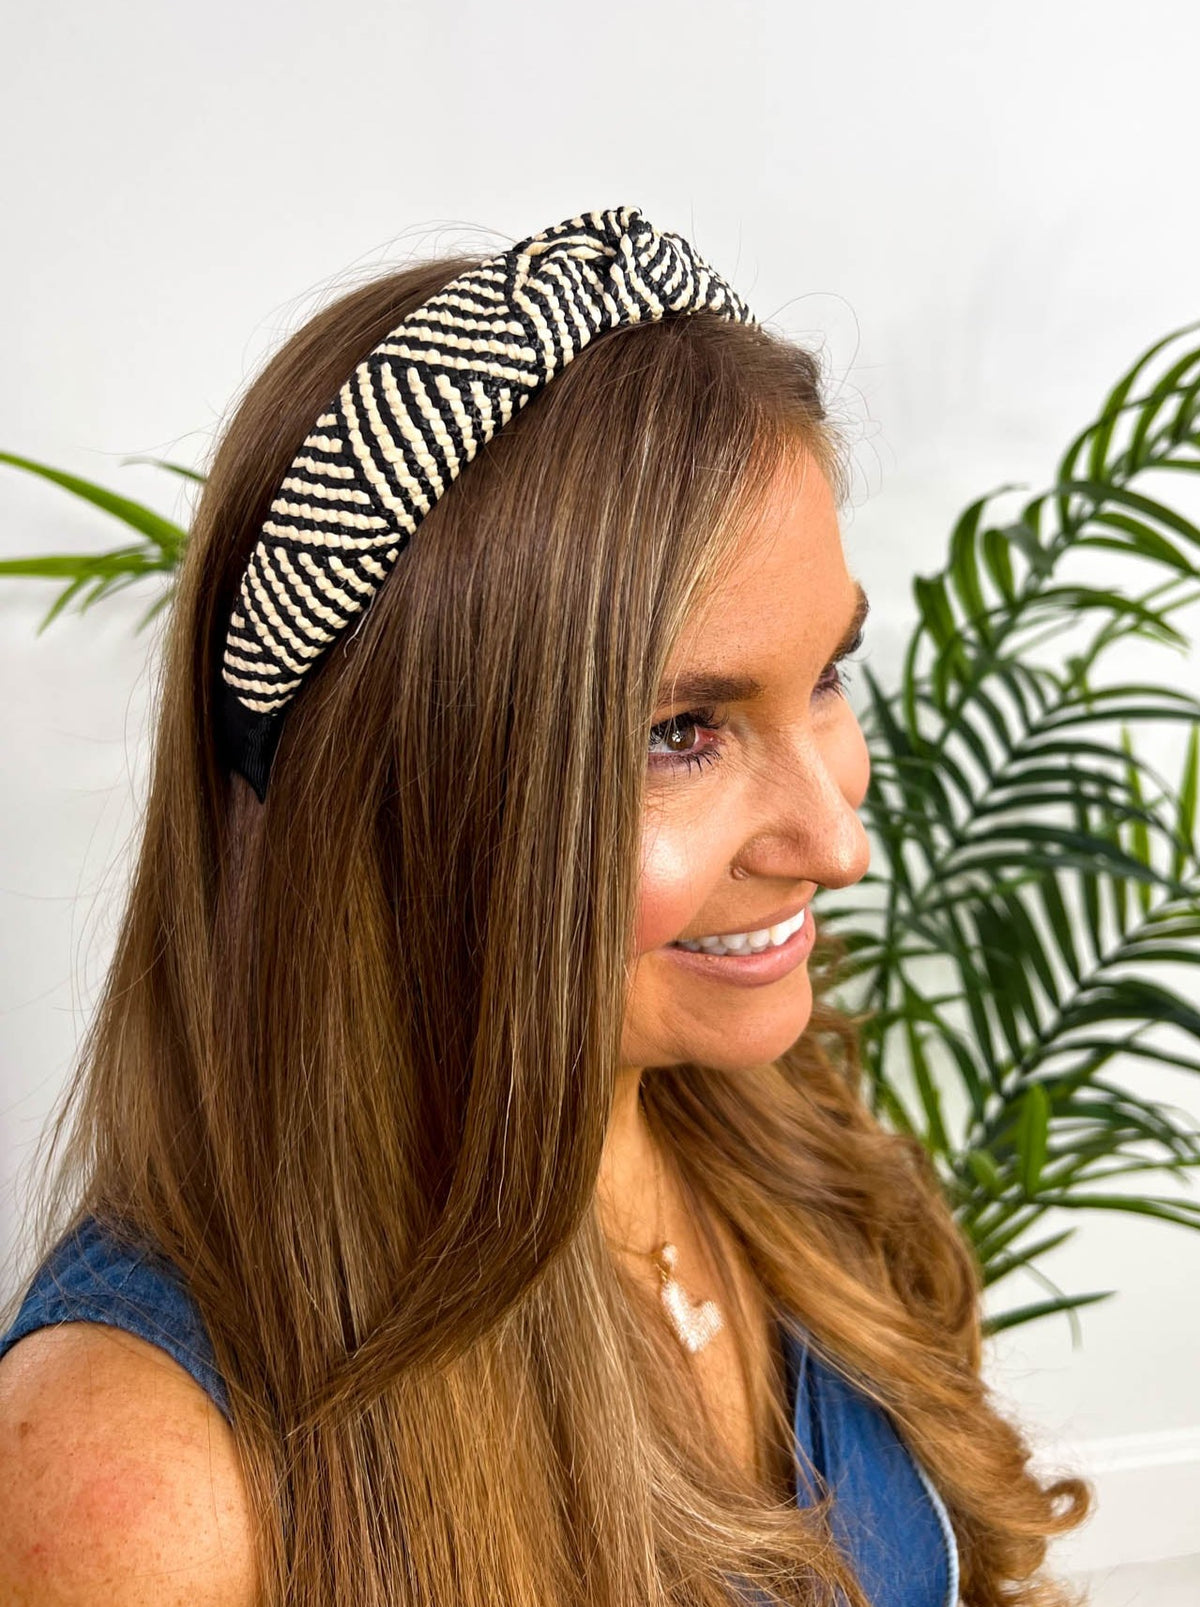 The Kirsty - Woven Headband with Black Lining